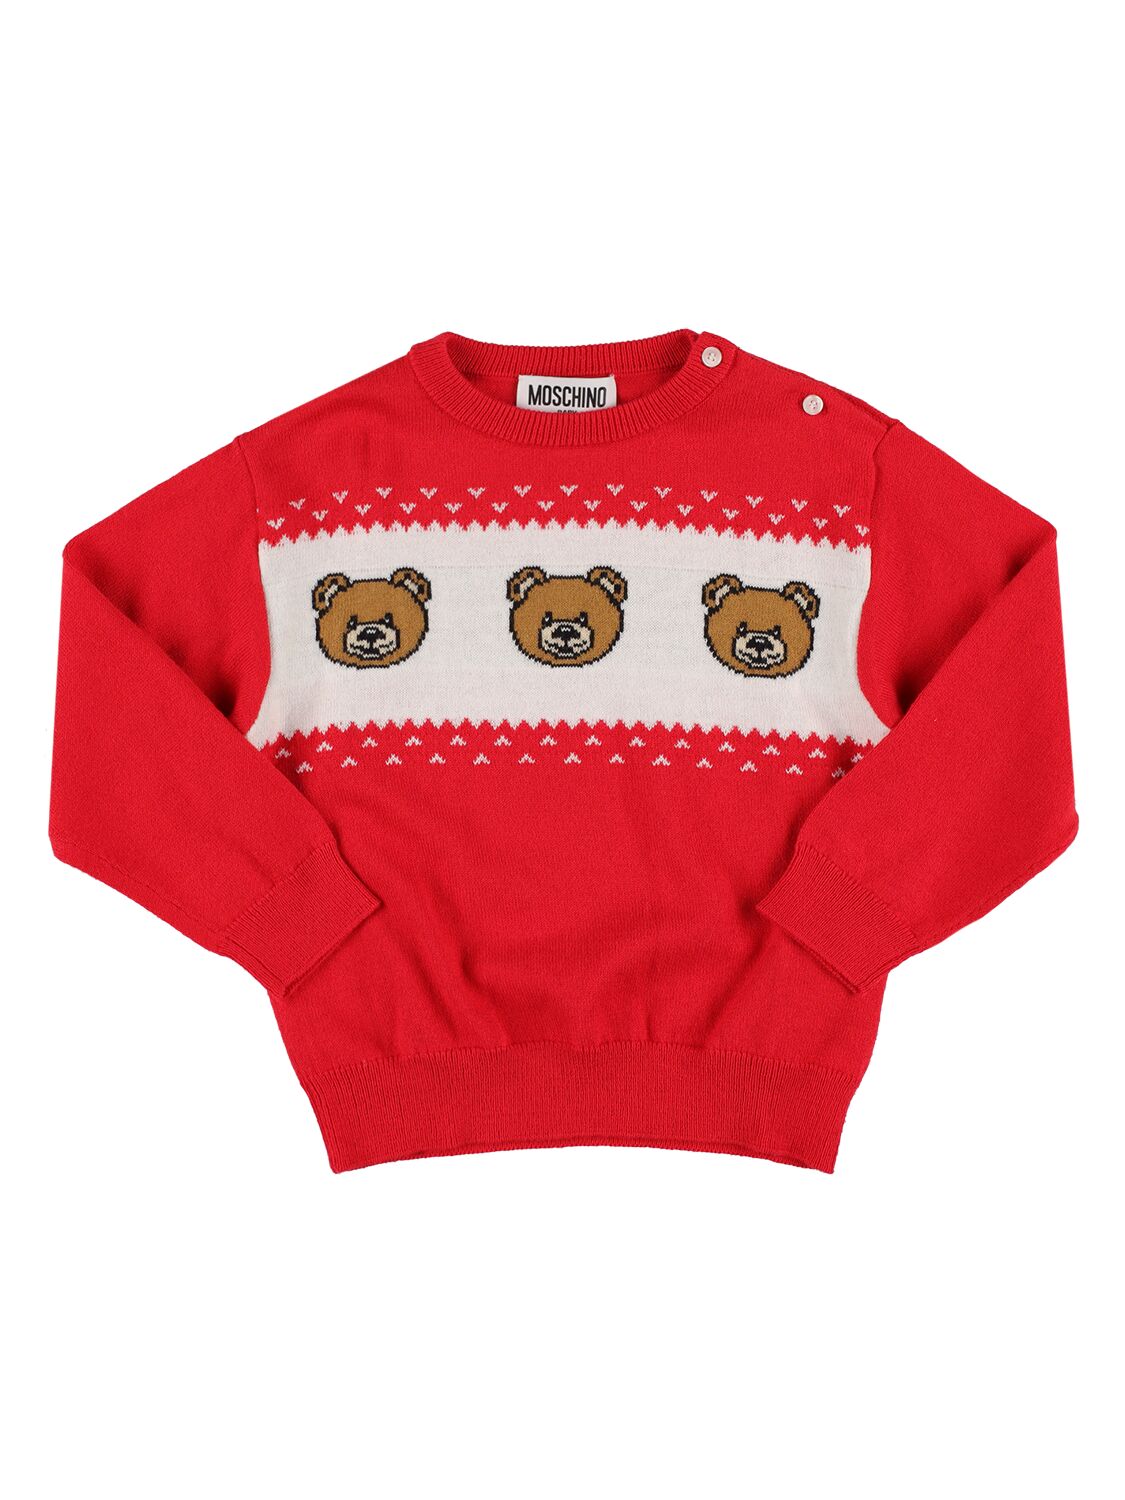 Moschino Kids' Wool & Cotton Jacquard Knit Jumper In Red